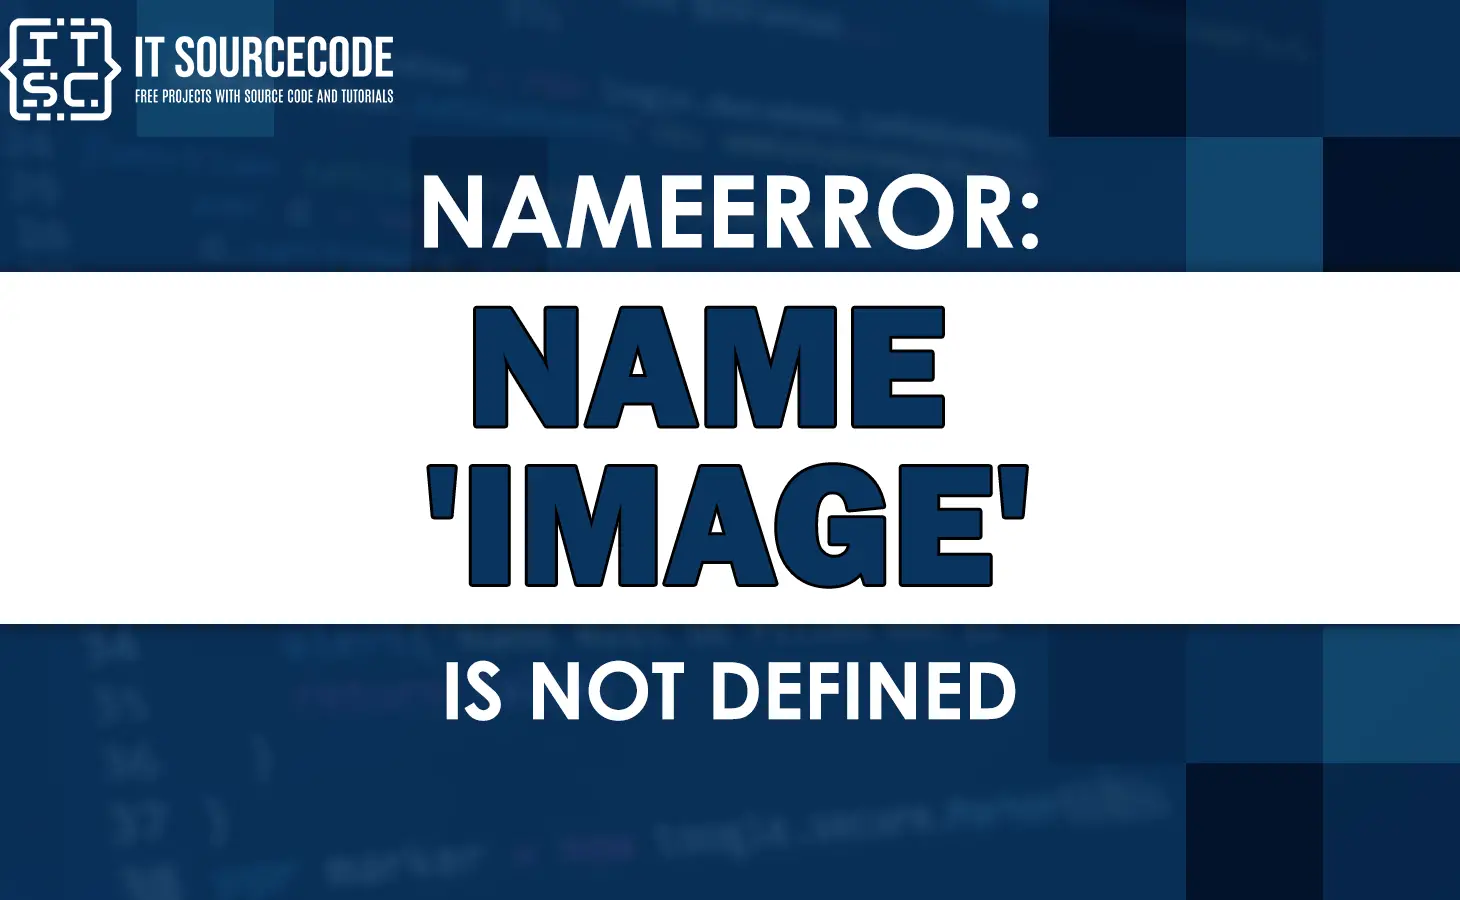 Nameerror: name image is not defined